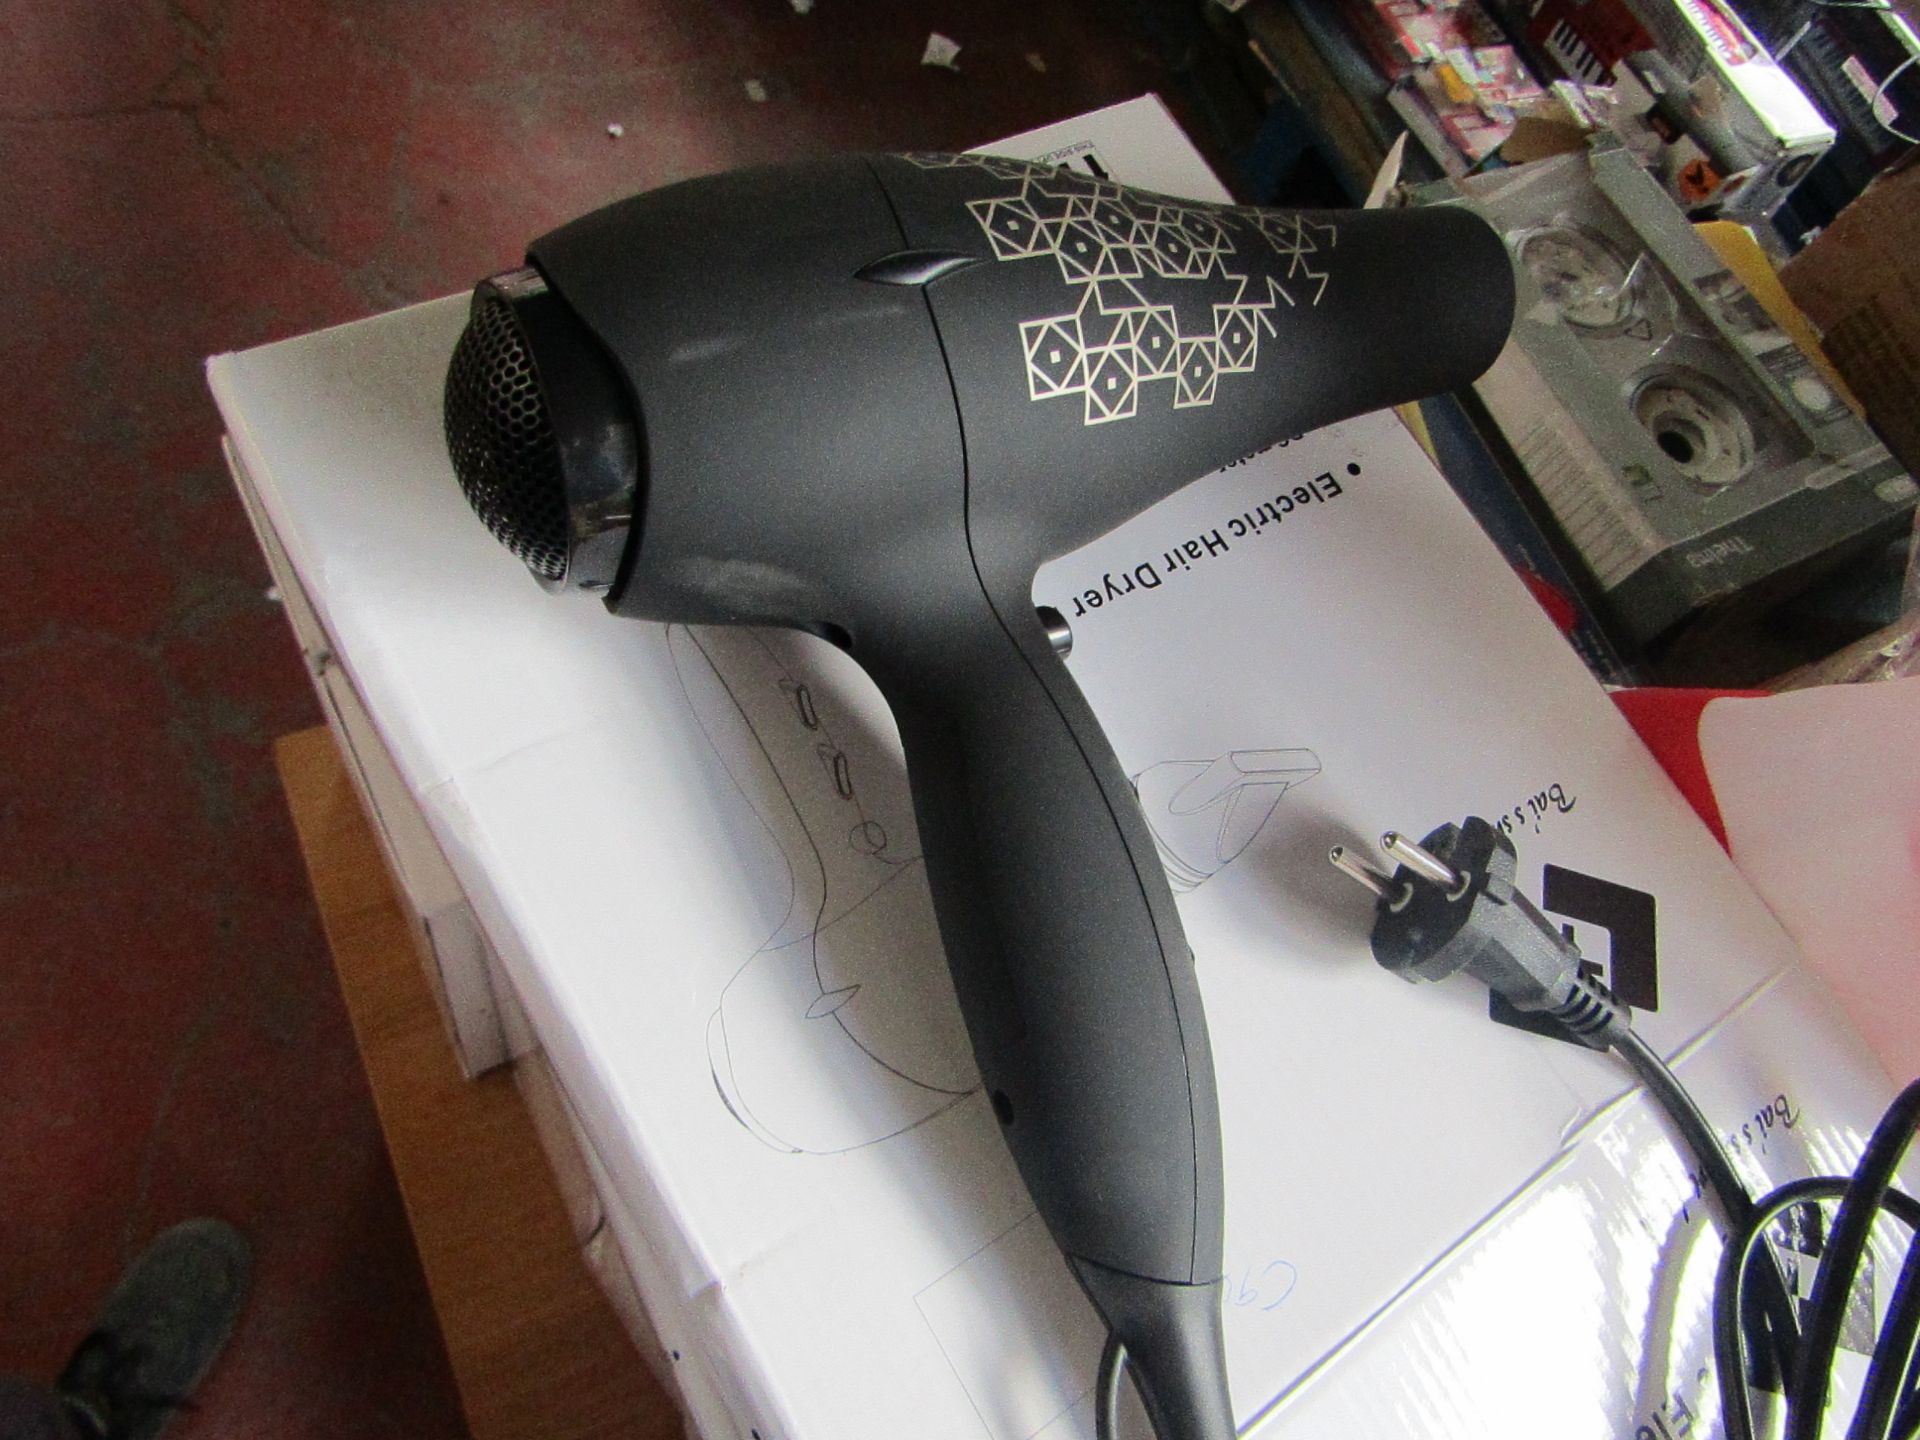 Bai's Electric Hair Dryer BY-529.Tested working but with EU plug(has UK Adapter in box tho)